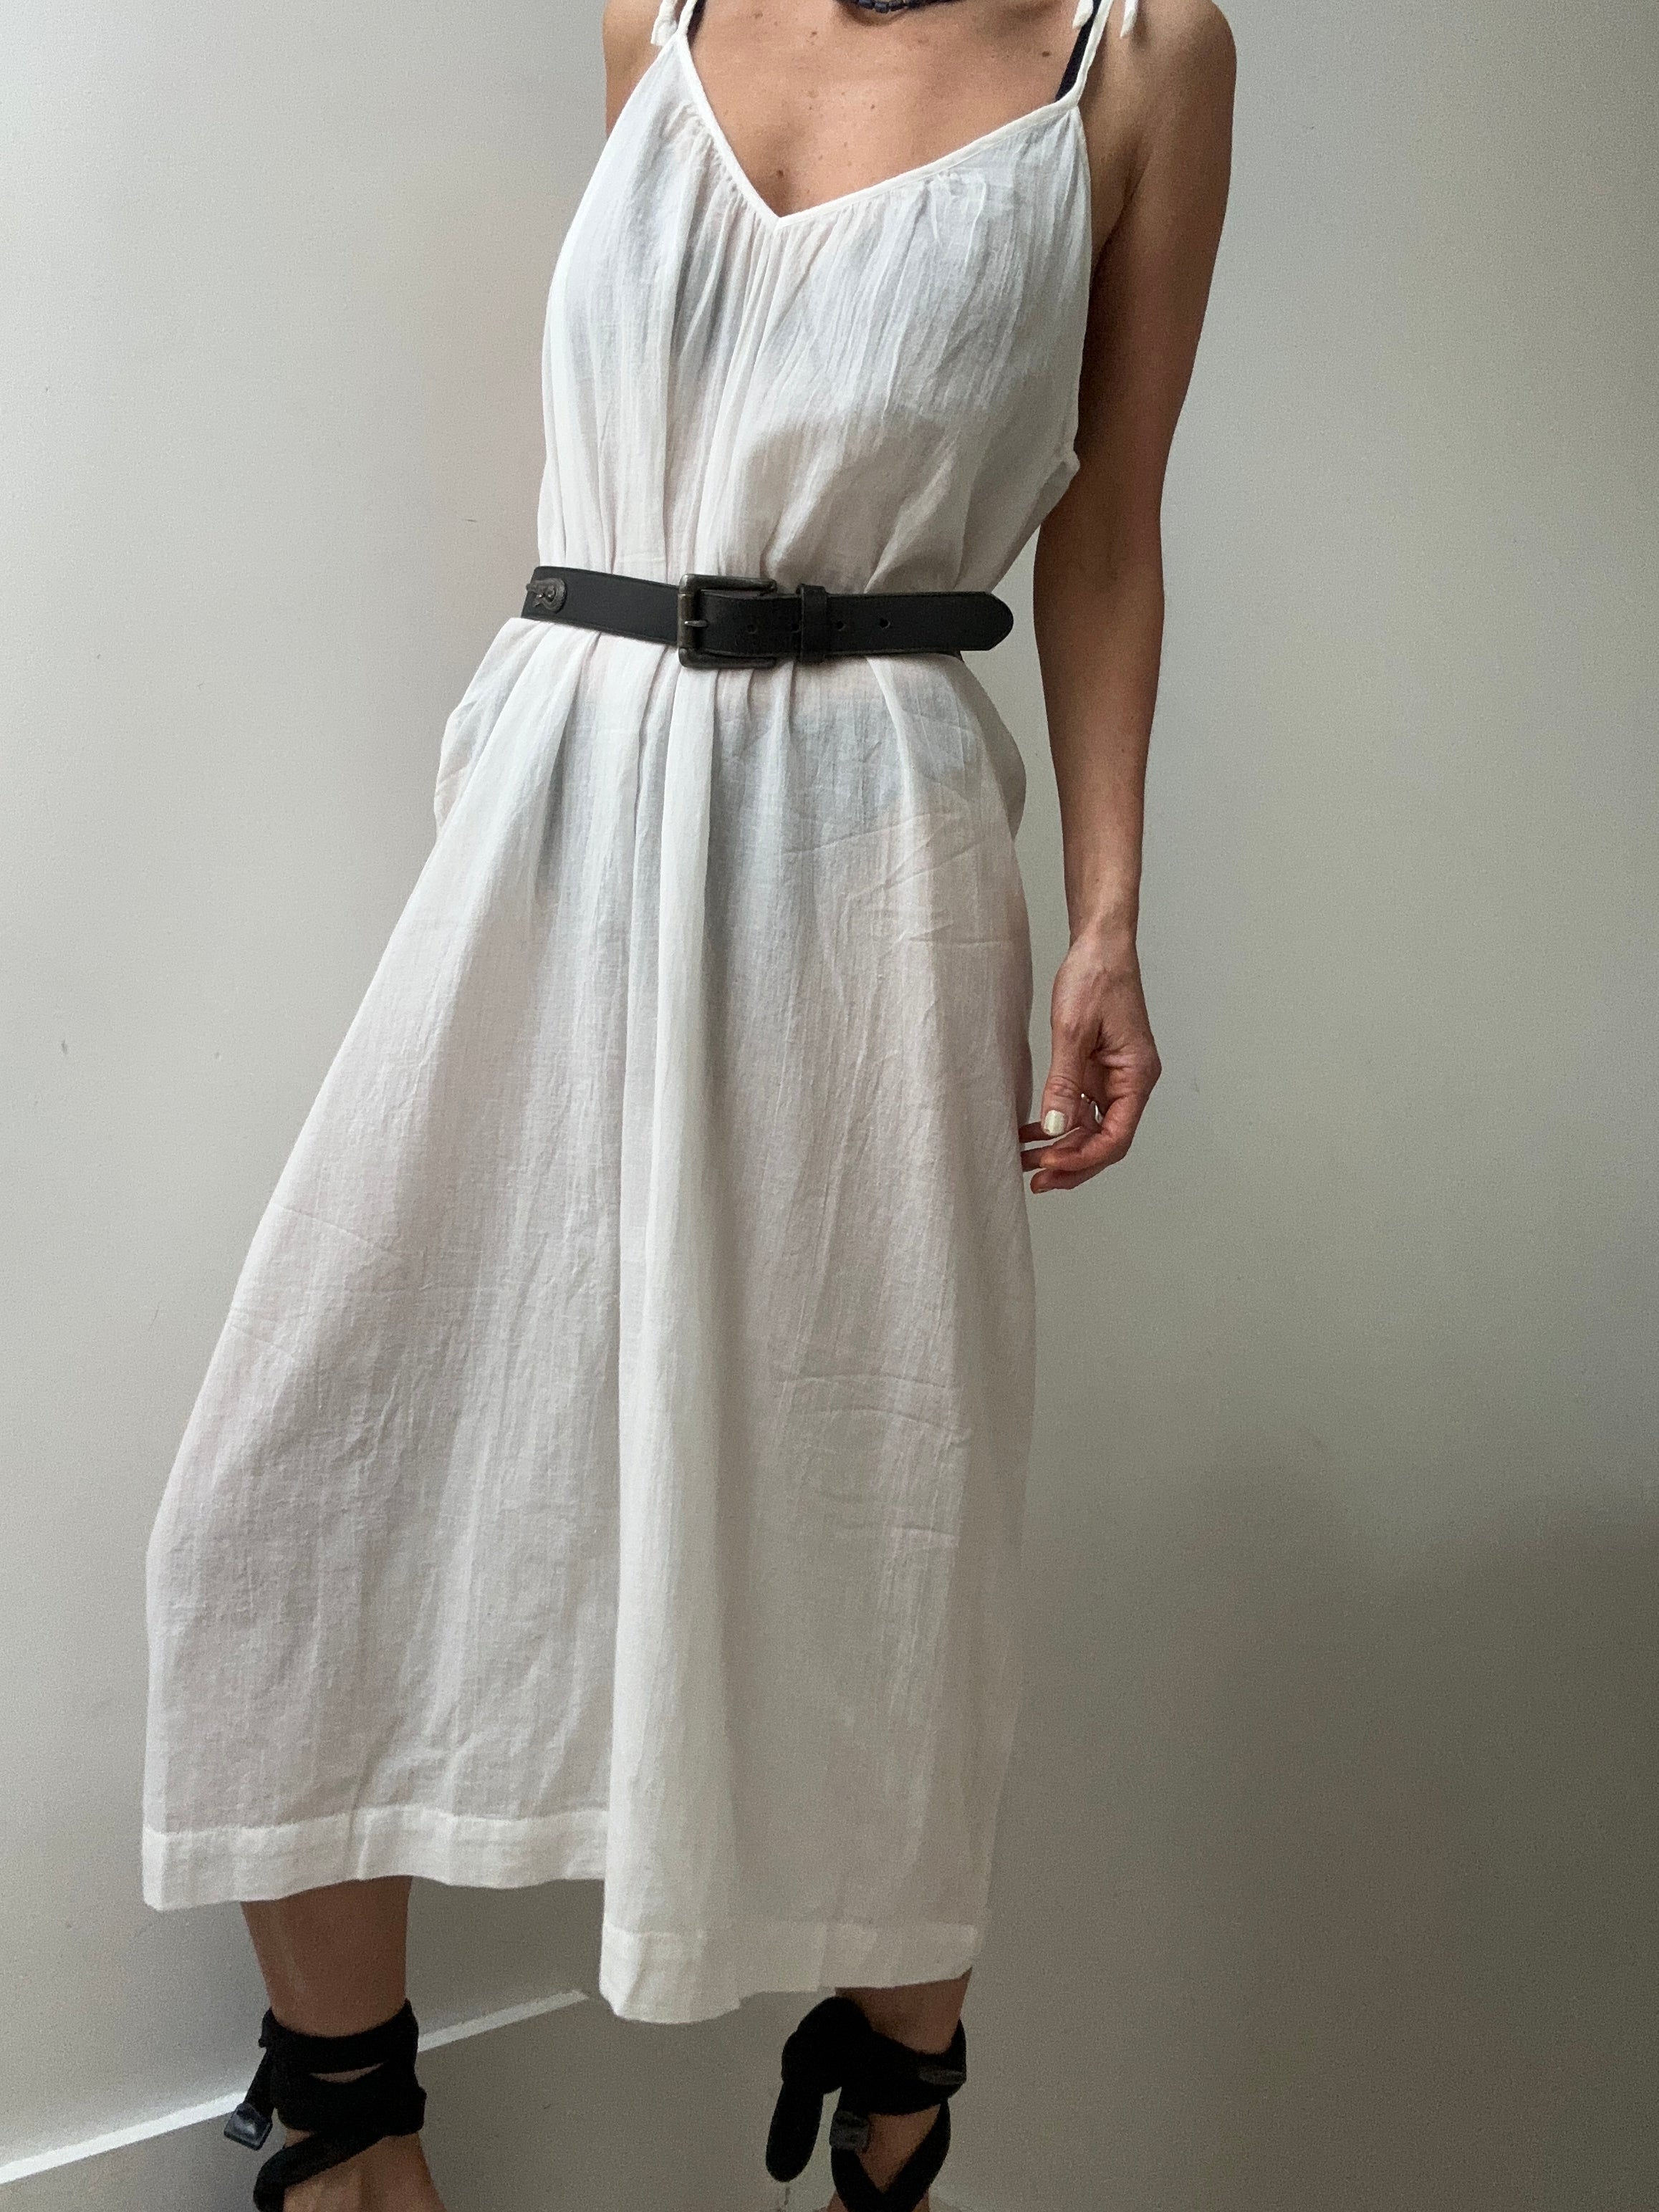 Jetsetbohemian Dresses One Size Tie Strap Cotton Dress in White